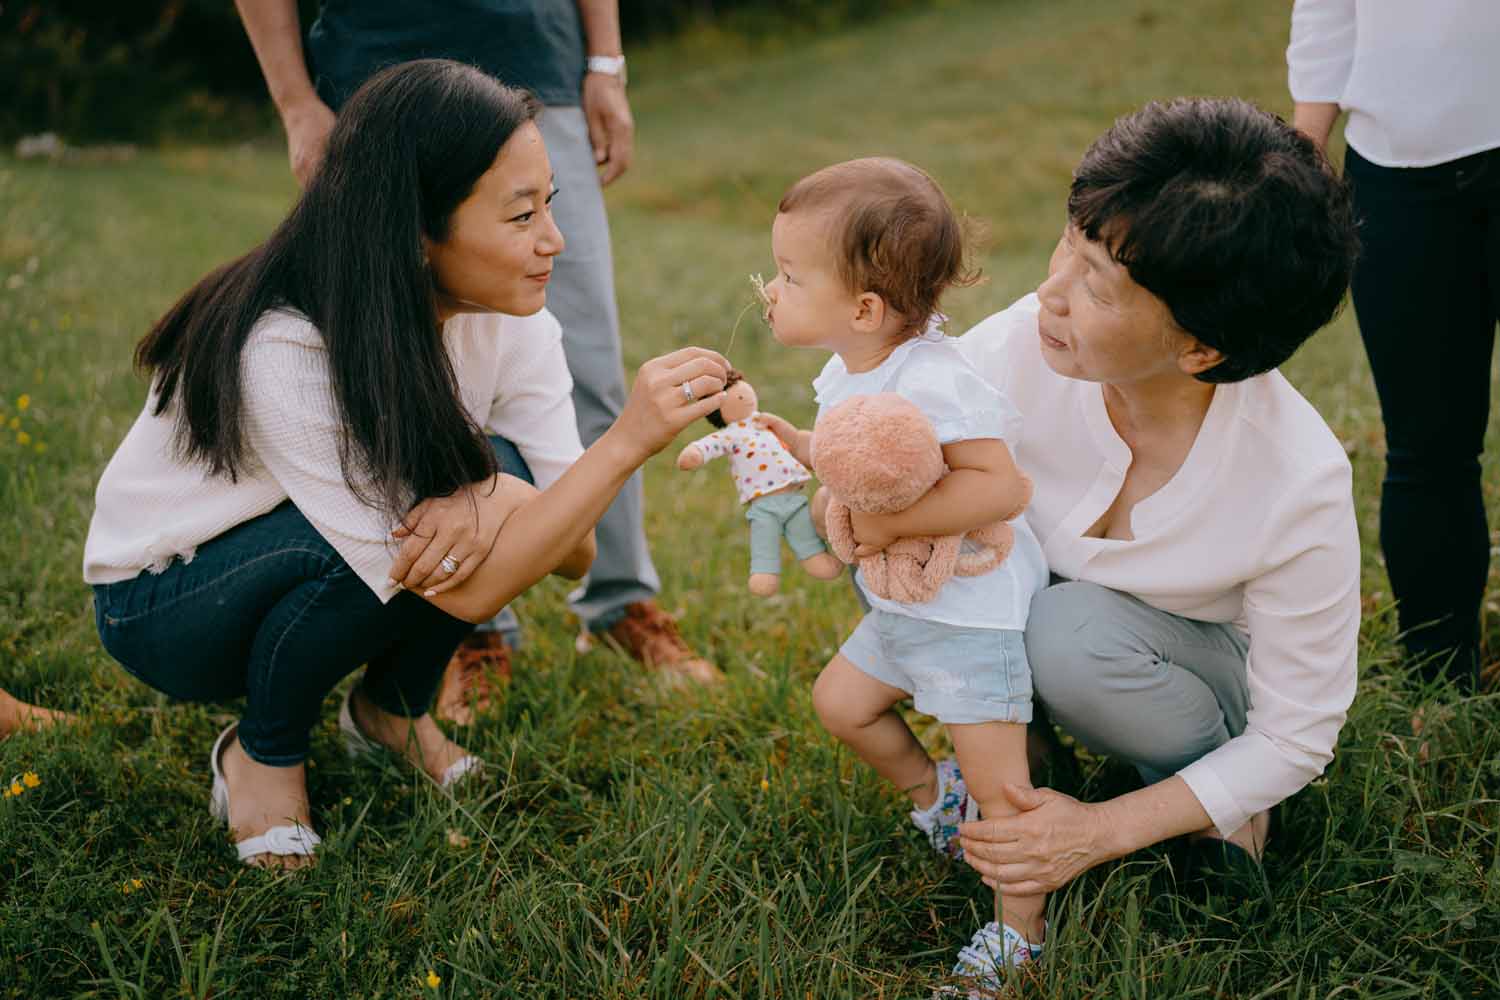 A family member, couched down to kid level, holds a flower up to a child's nose so that they may smell it, while another family member holds the child.